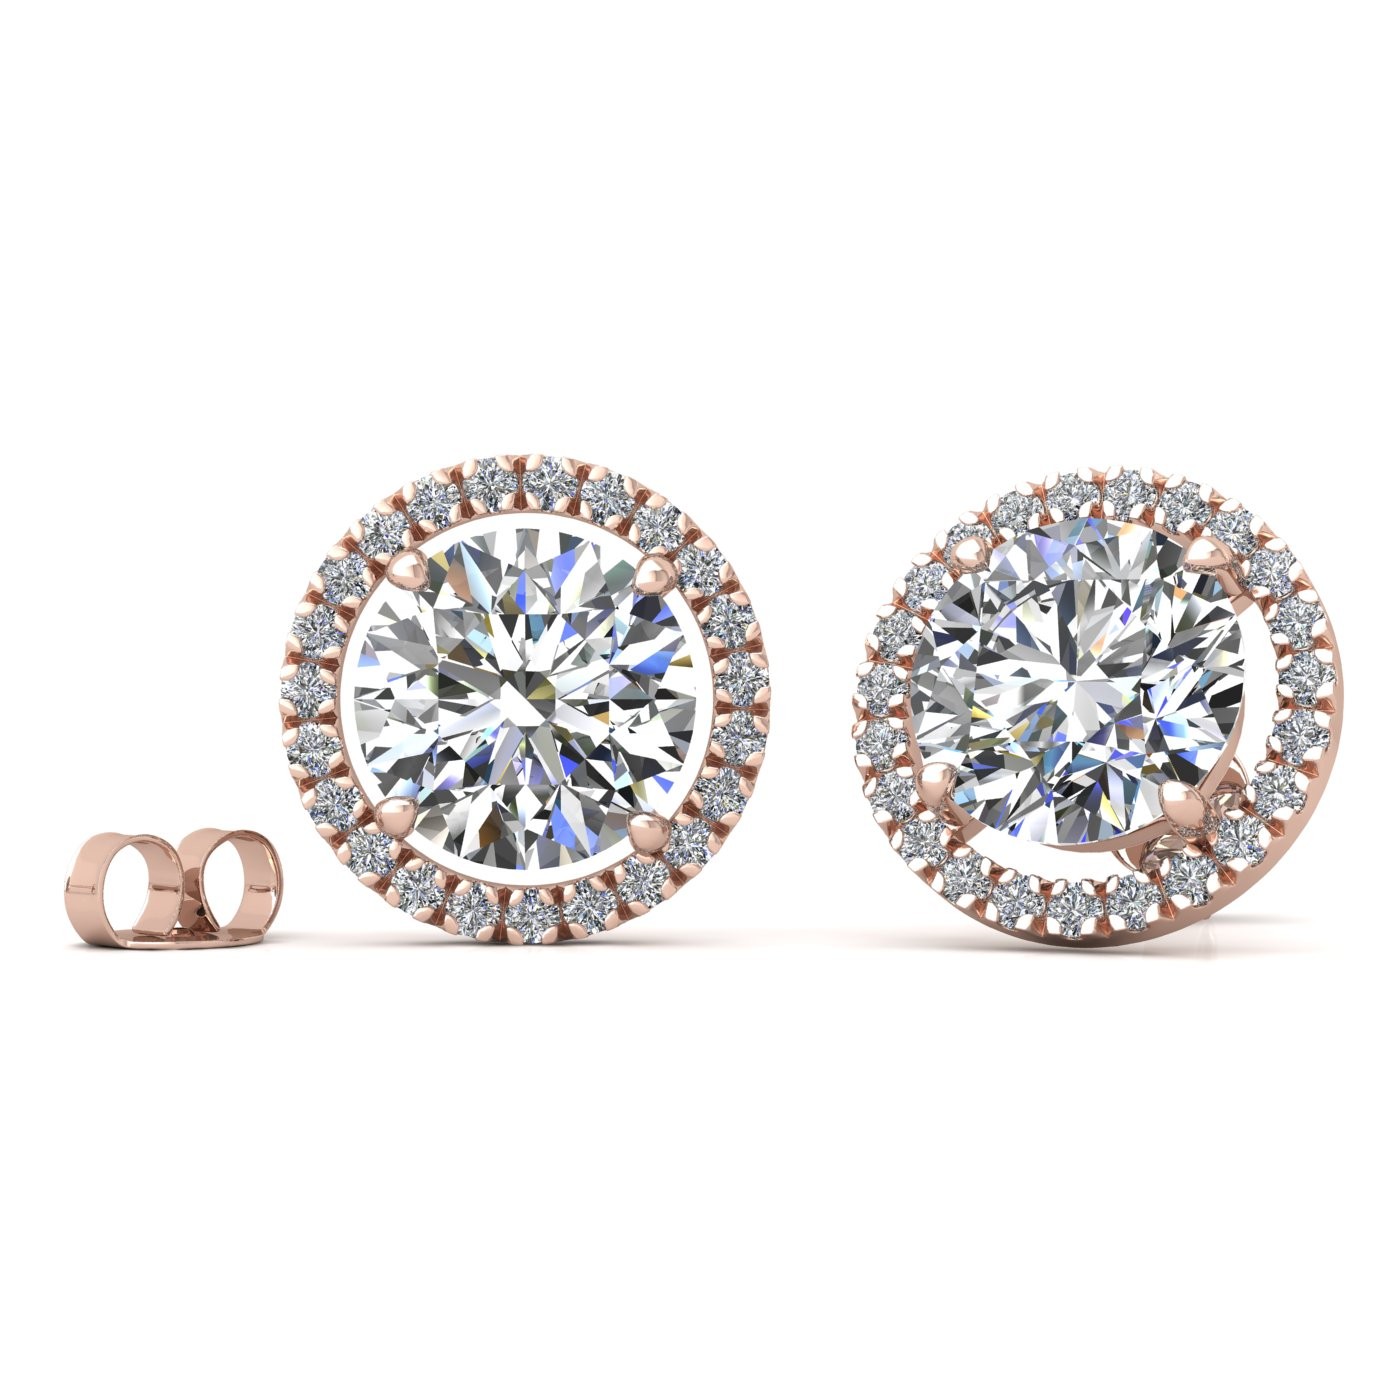 18k rose gold  0,3 ct each (0,6 tcw) 4 prongs round brilliant cut halo diamond earring studs Photos & images